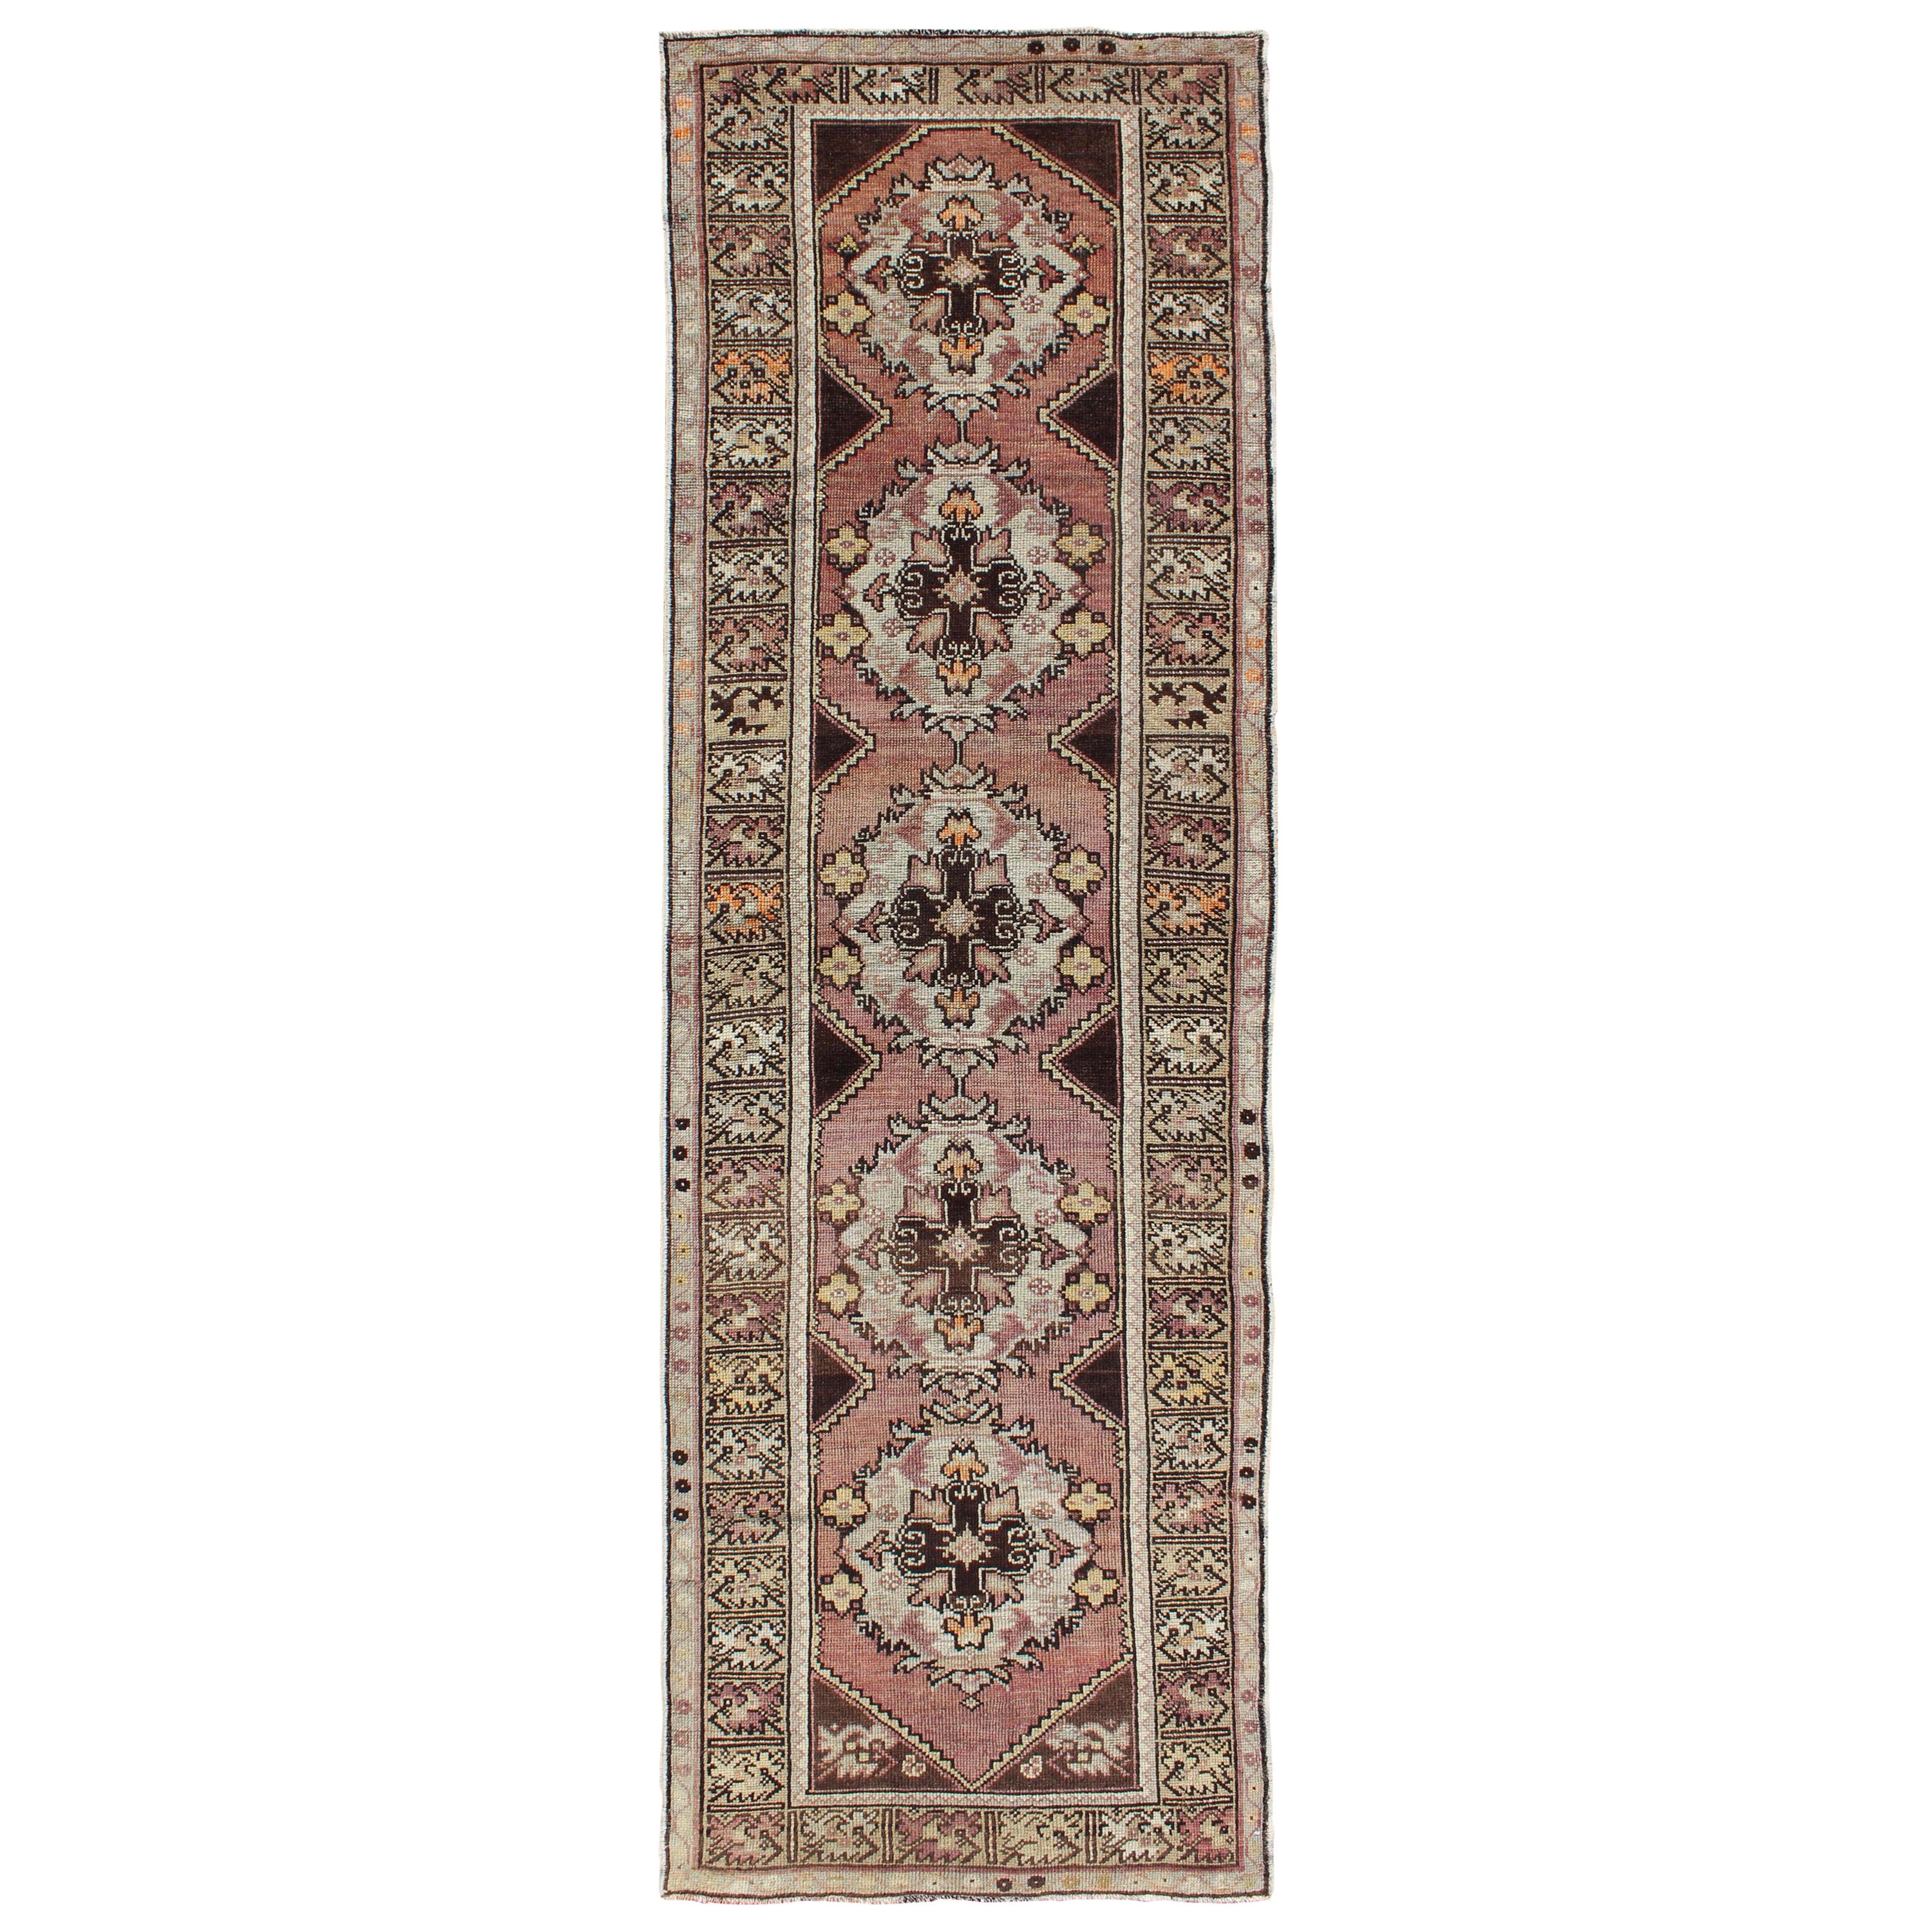 Vintage Turkish Oushak Runner with Floral Medallions in Brown Lavender and Taupe